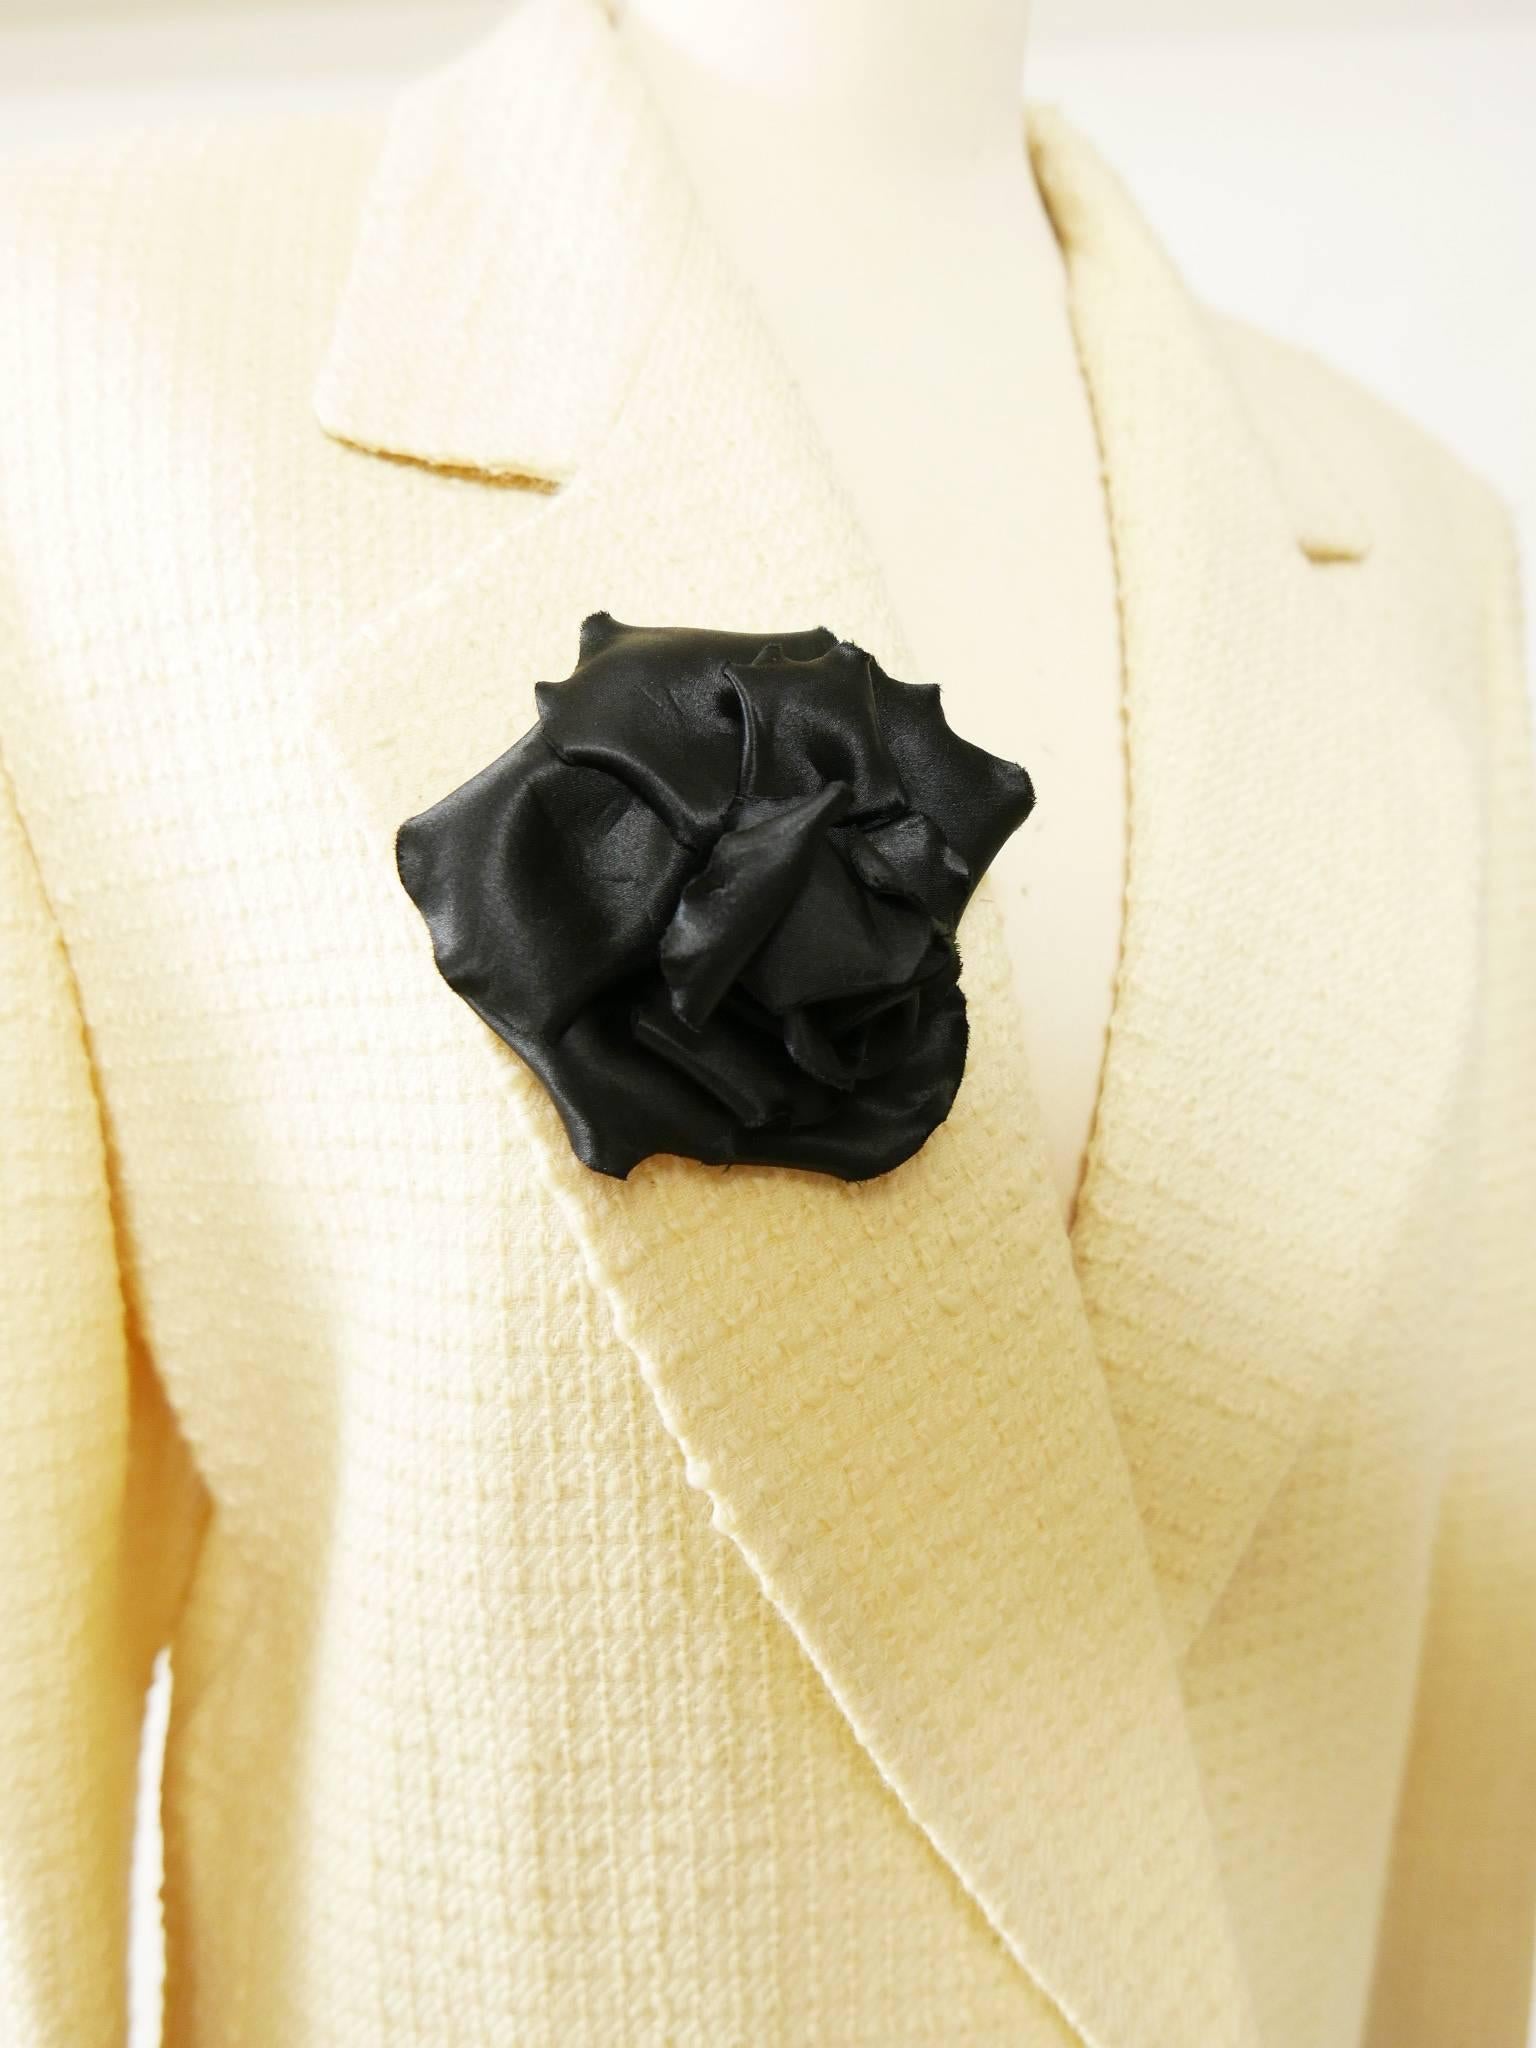 This gorgeous Authentic Chanel Rose flower Brooch is in black satin. It has Chanel CC Made in France engraved on the back. It has a pin with secure closure. 
Can be attached to your Jacket or secure your scarf or used as accessory.  
Is the